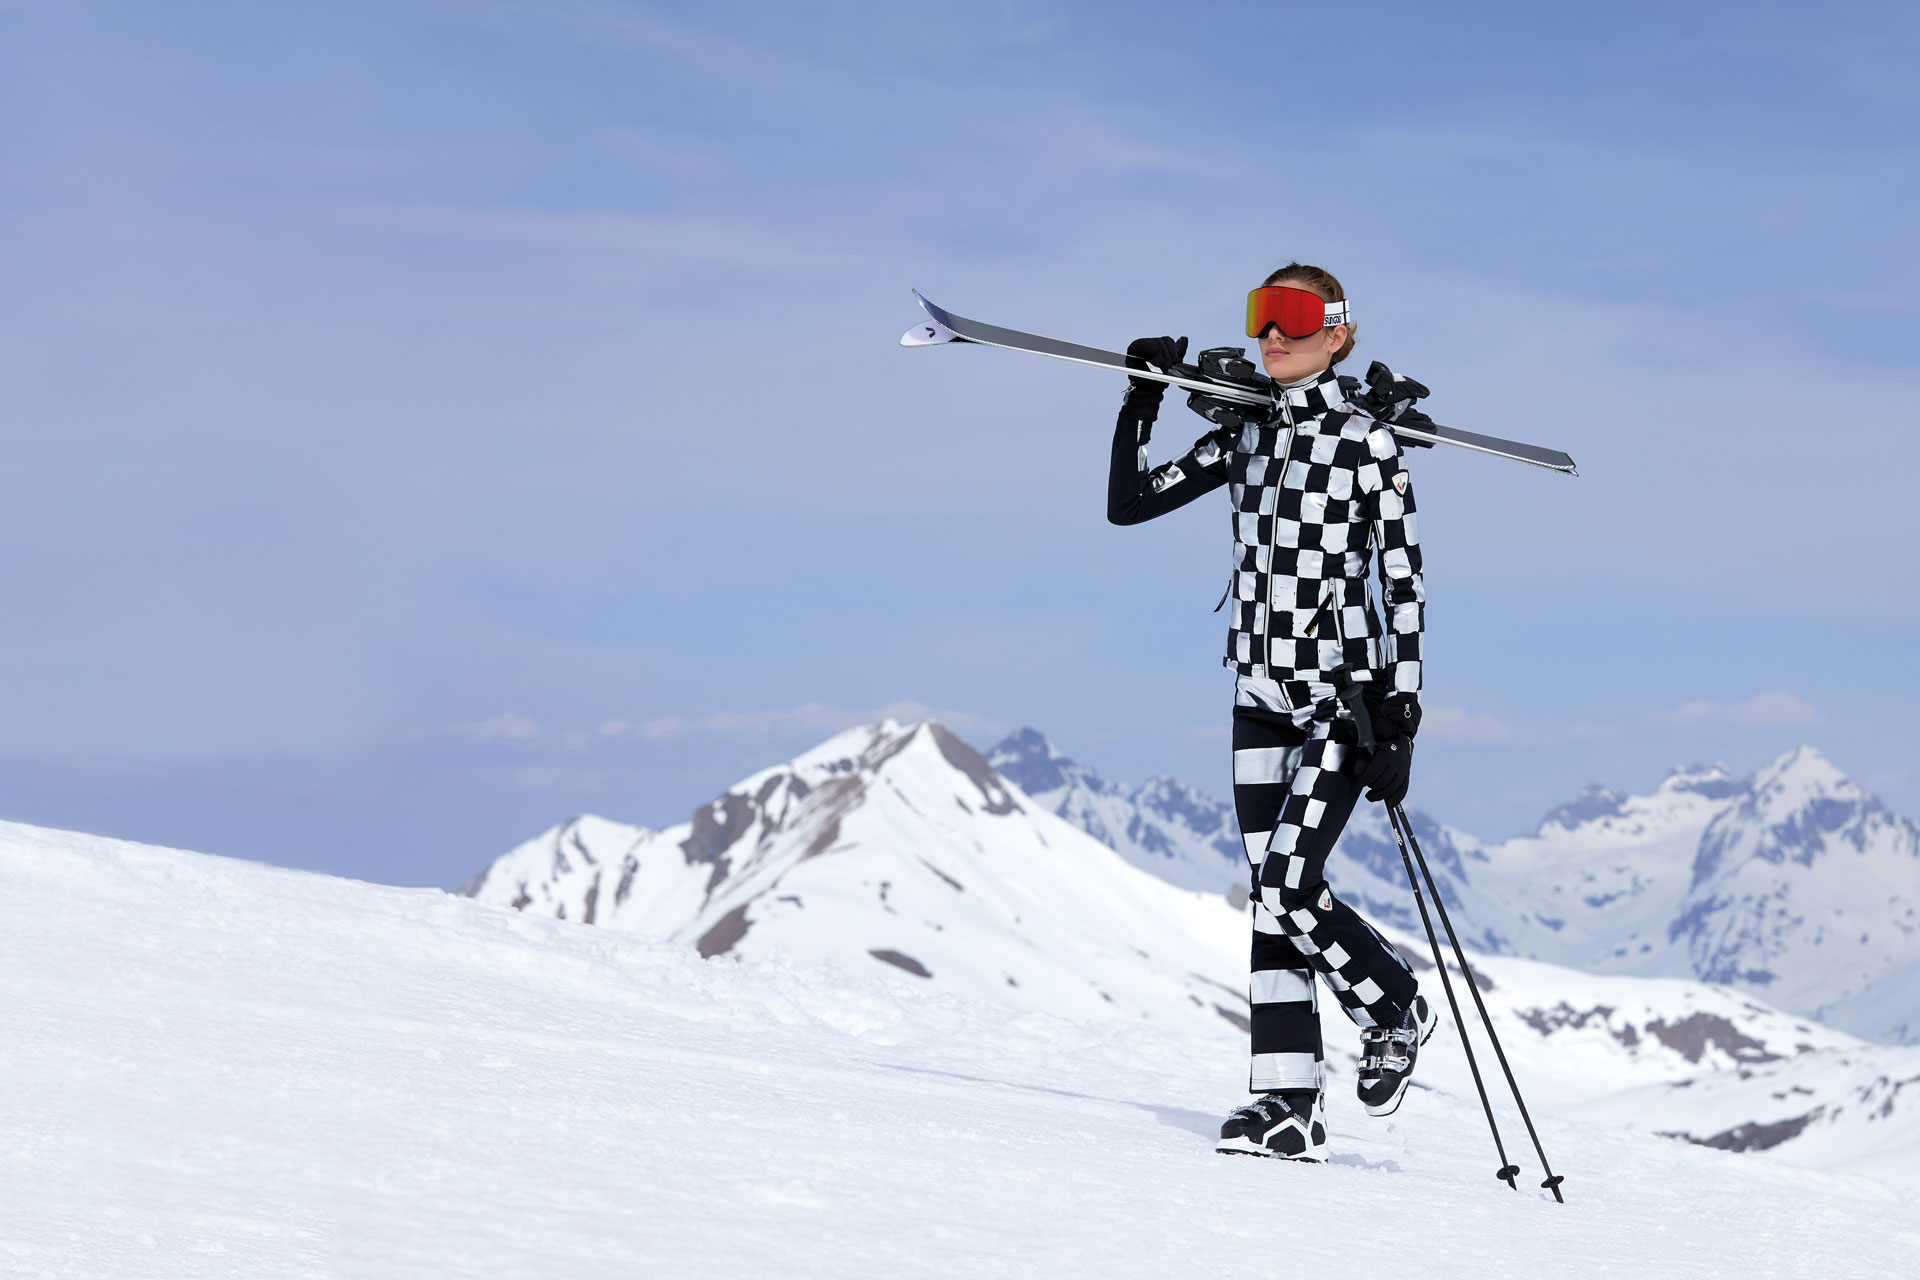 Sloobie Skiwear partners with Hirestreet to bring rentals to the